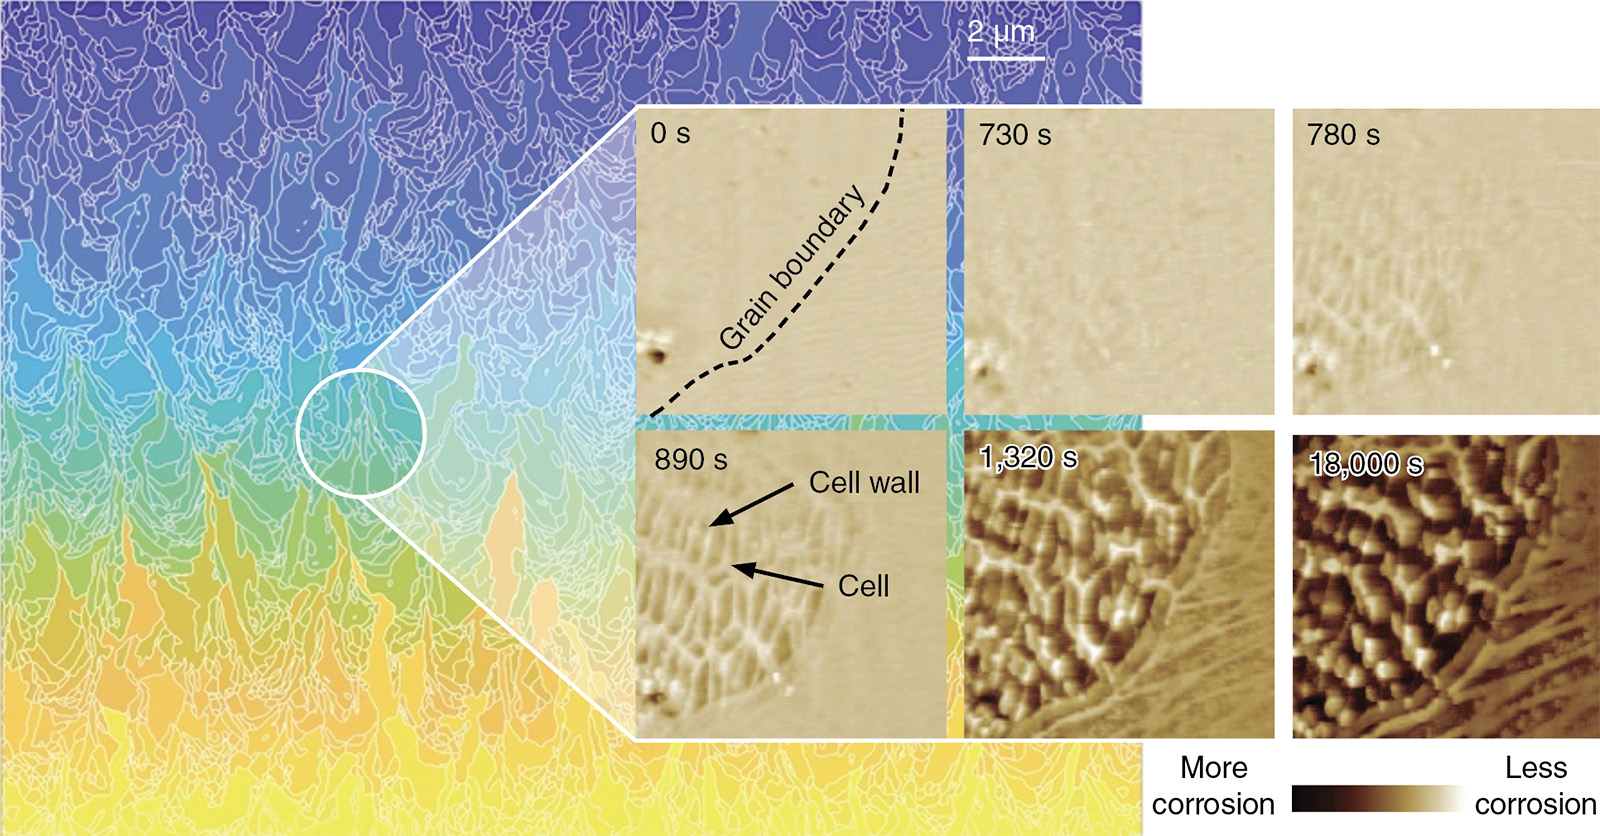 microscope images in the foreground depict the changes to a material over the course of an experiment